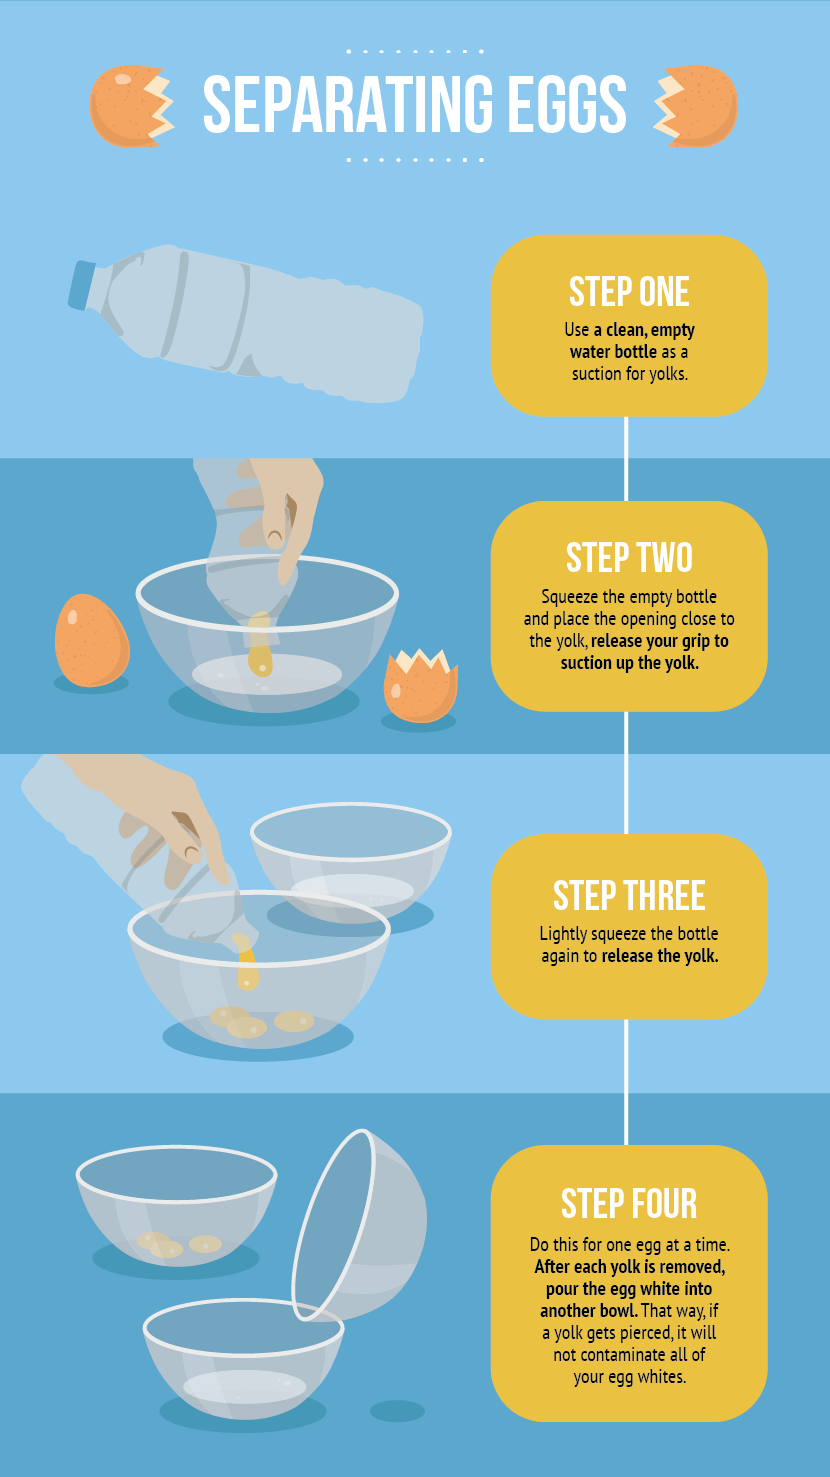 Separating Eggs - All About Baking with Eggs 